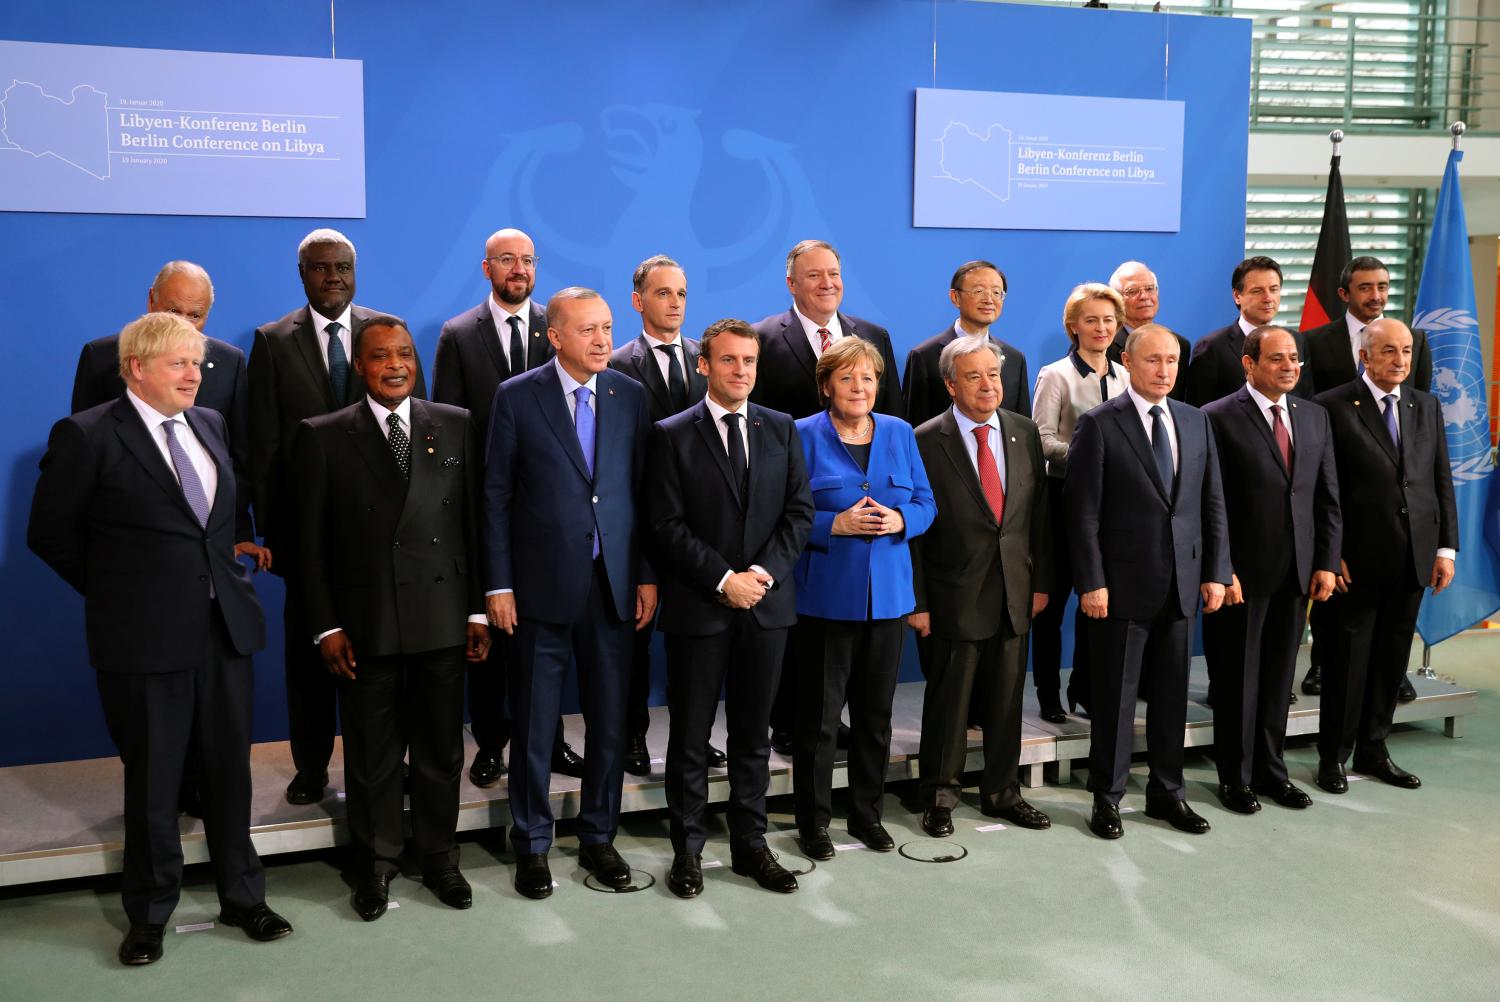 Britain's Prime Minister Boris Johnson, Republic of Congo's President Denis Sassou Nguesso, Turkish President Recep Tayyip Erdogan, French President Emmanuel Macron, German Chancellor Angela Merkel, United Nations Secretary-General Antonio Guterres, Russian President Vladimir Putin, Egyptian President Abdel Fattah al-Sisi, Algerian President Abdelmadjid Tebboune, U.S. Secretary of State Mike Pompeo and European Commission President Ursula von der Leyen pose for a family photo during the Libya summit in Berlin, Germany, January 19, 2020. Murat Cetinmuhurdar/Turkish Presidential Press Office/Handout via REUTERS ATTENTION EDITORS - THIS PICTURE WAS PROVIDED BY A THIRD PARTY. NO RESALES. NO ARCHIVE